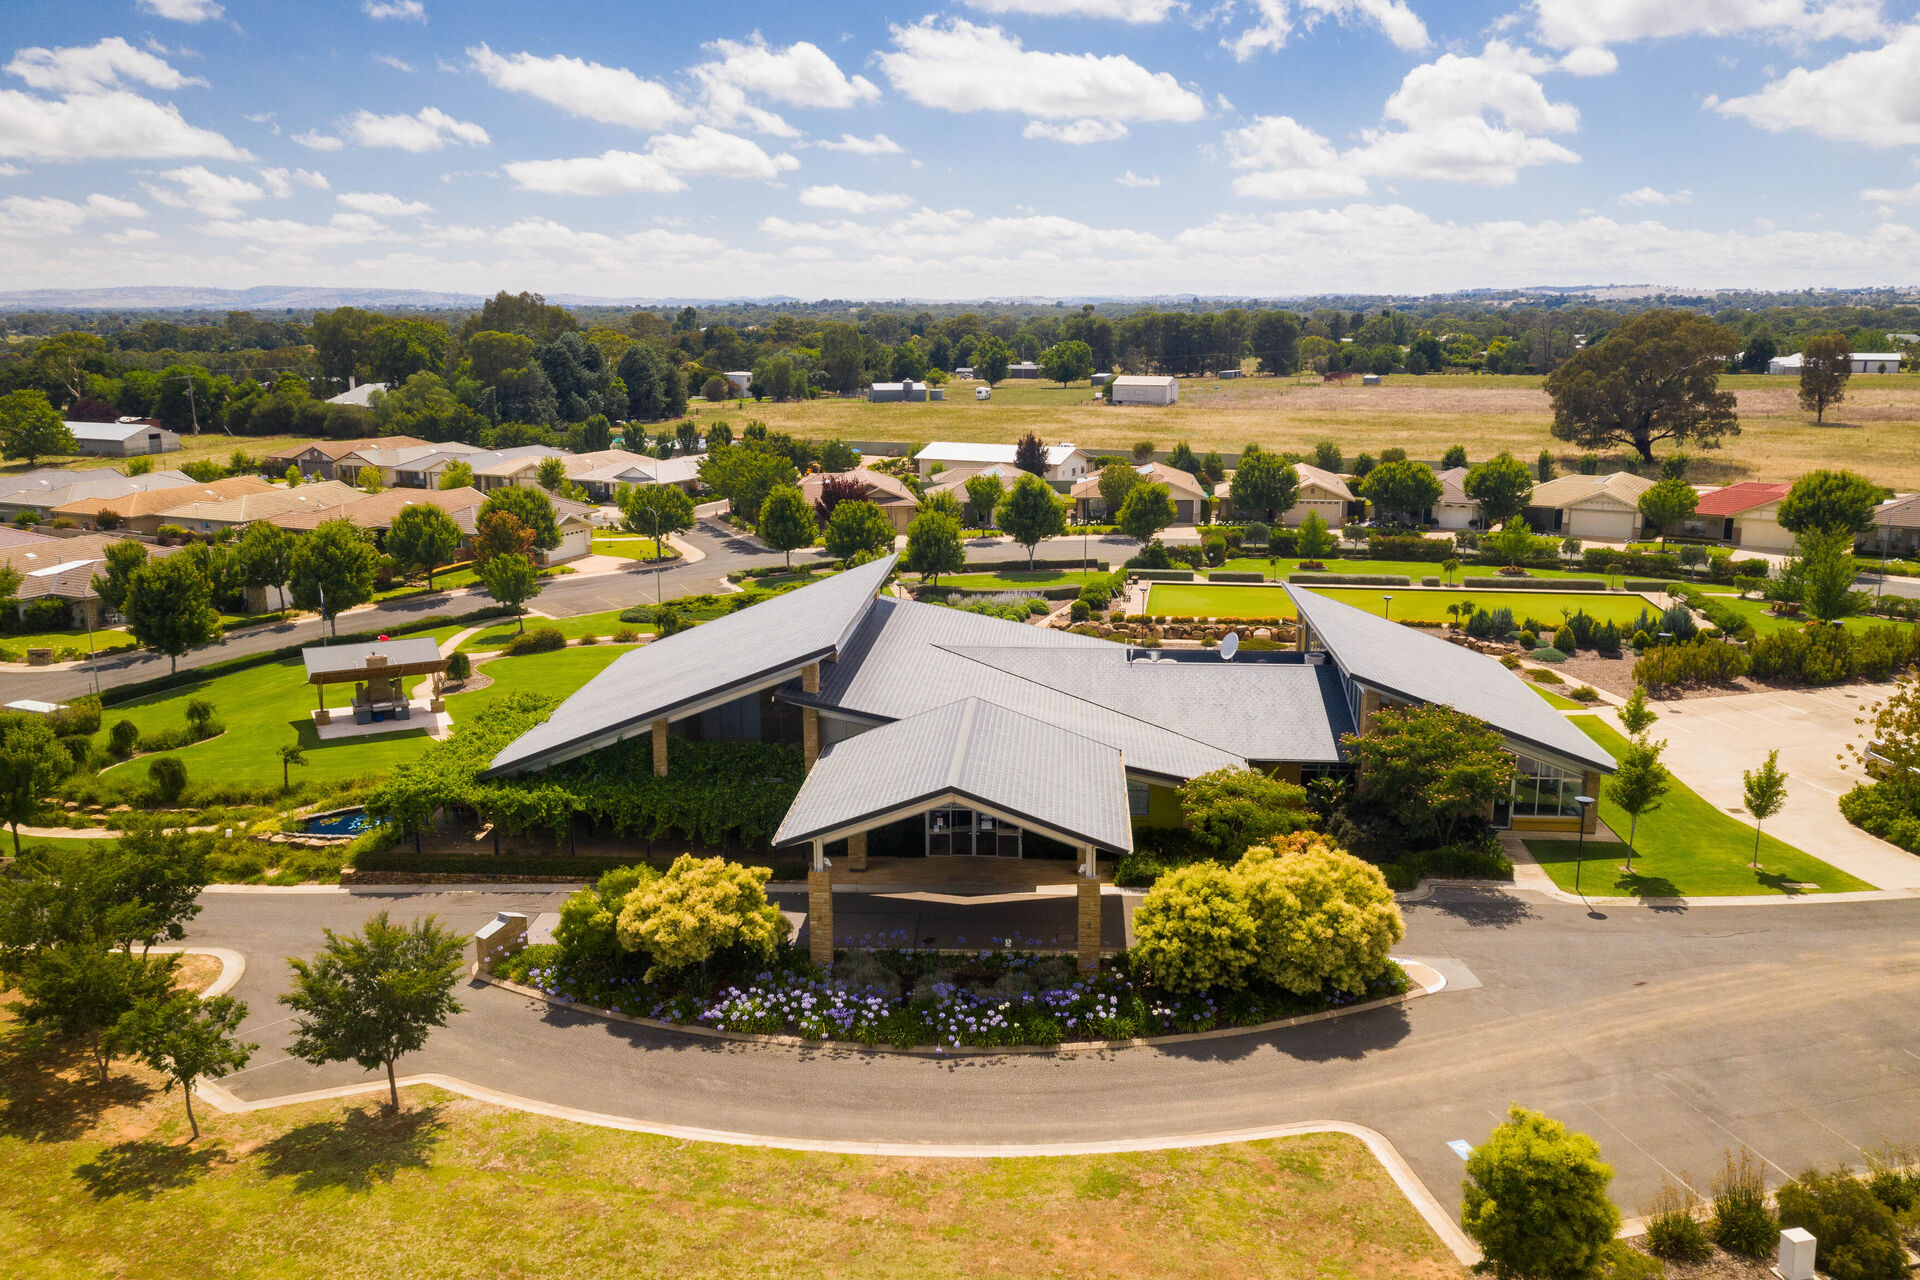 high view of the community centre for all residents at the grange retirement village in wagga wagga